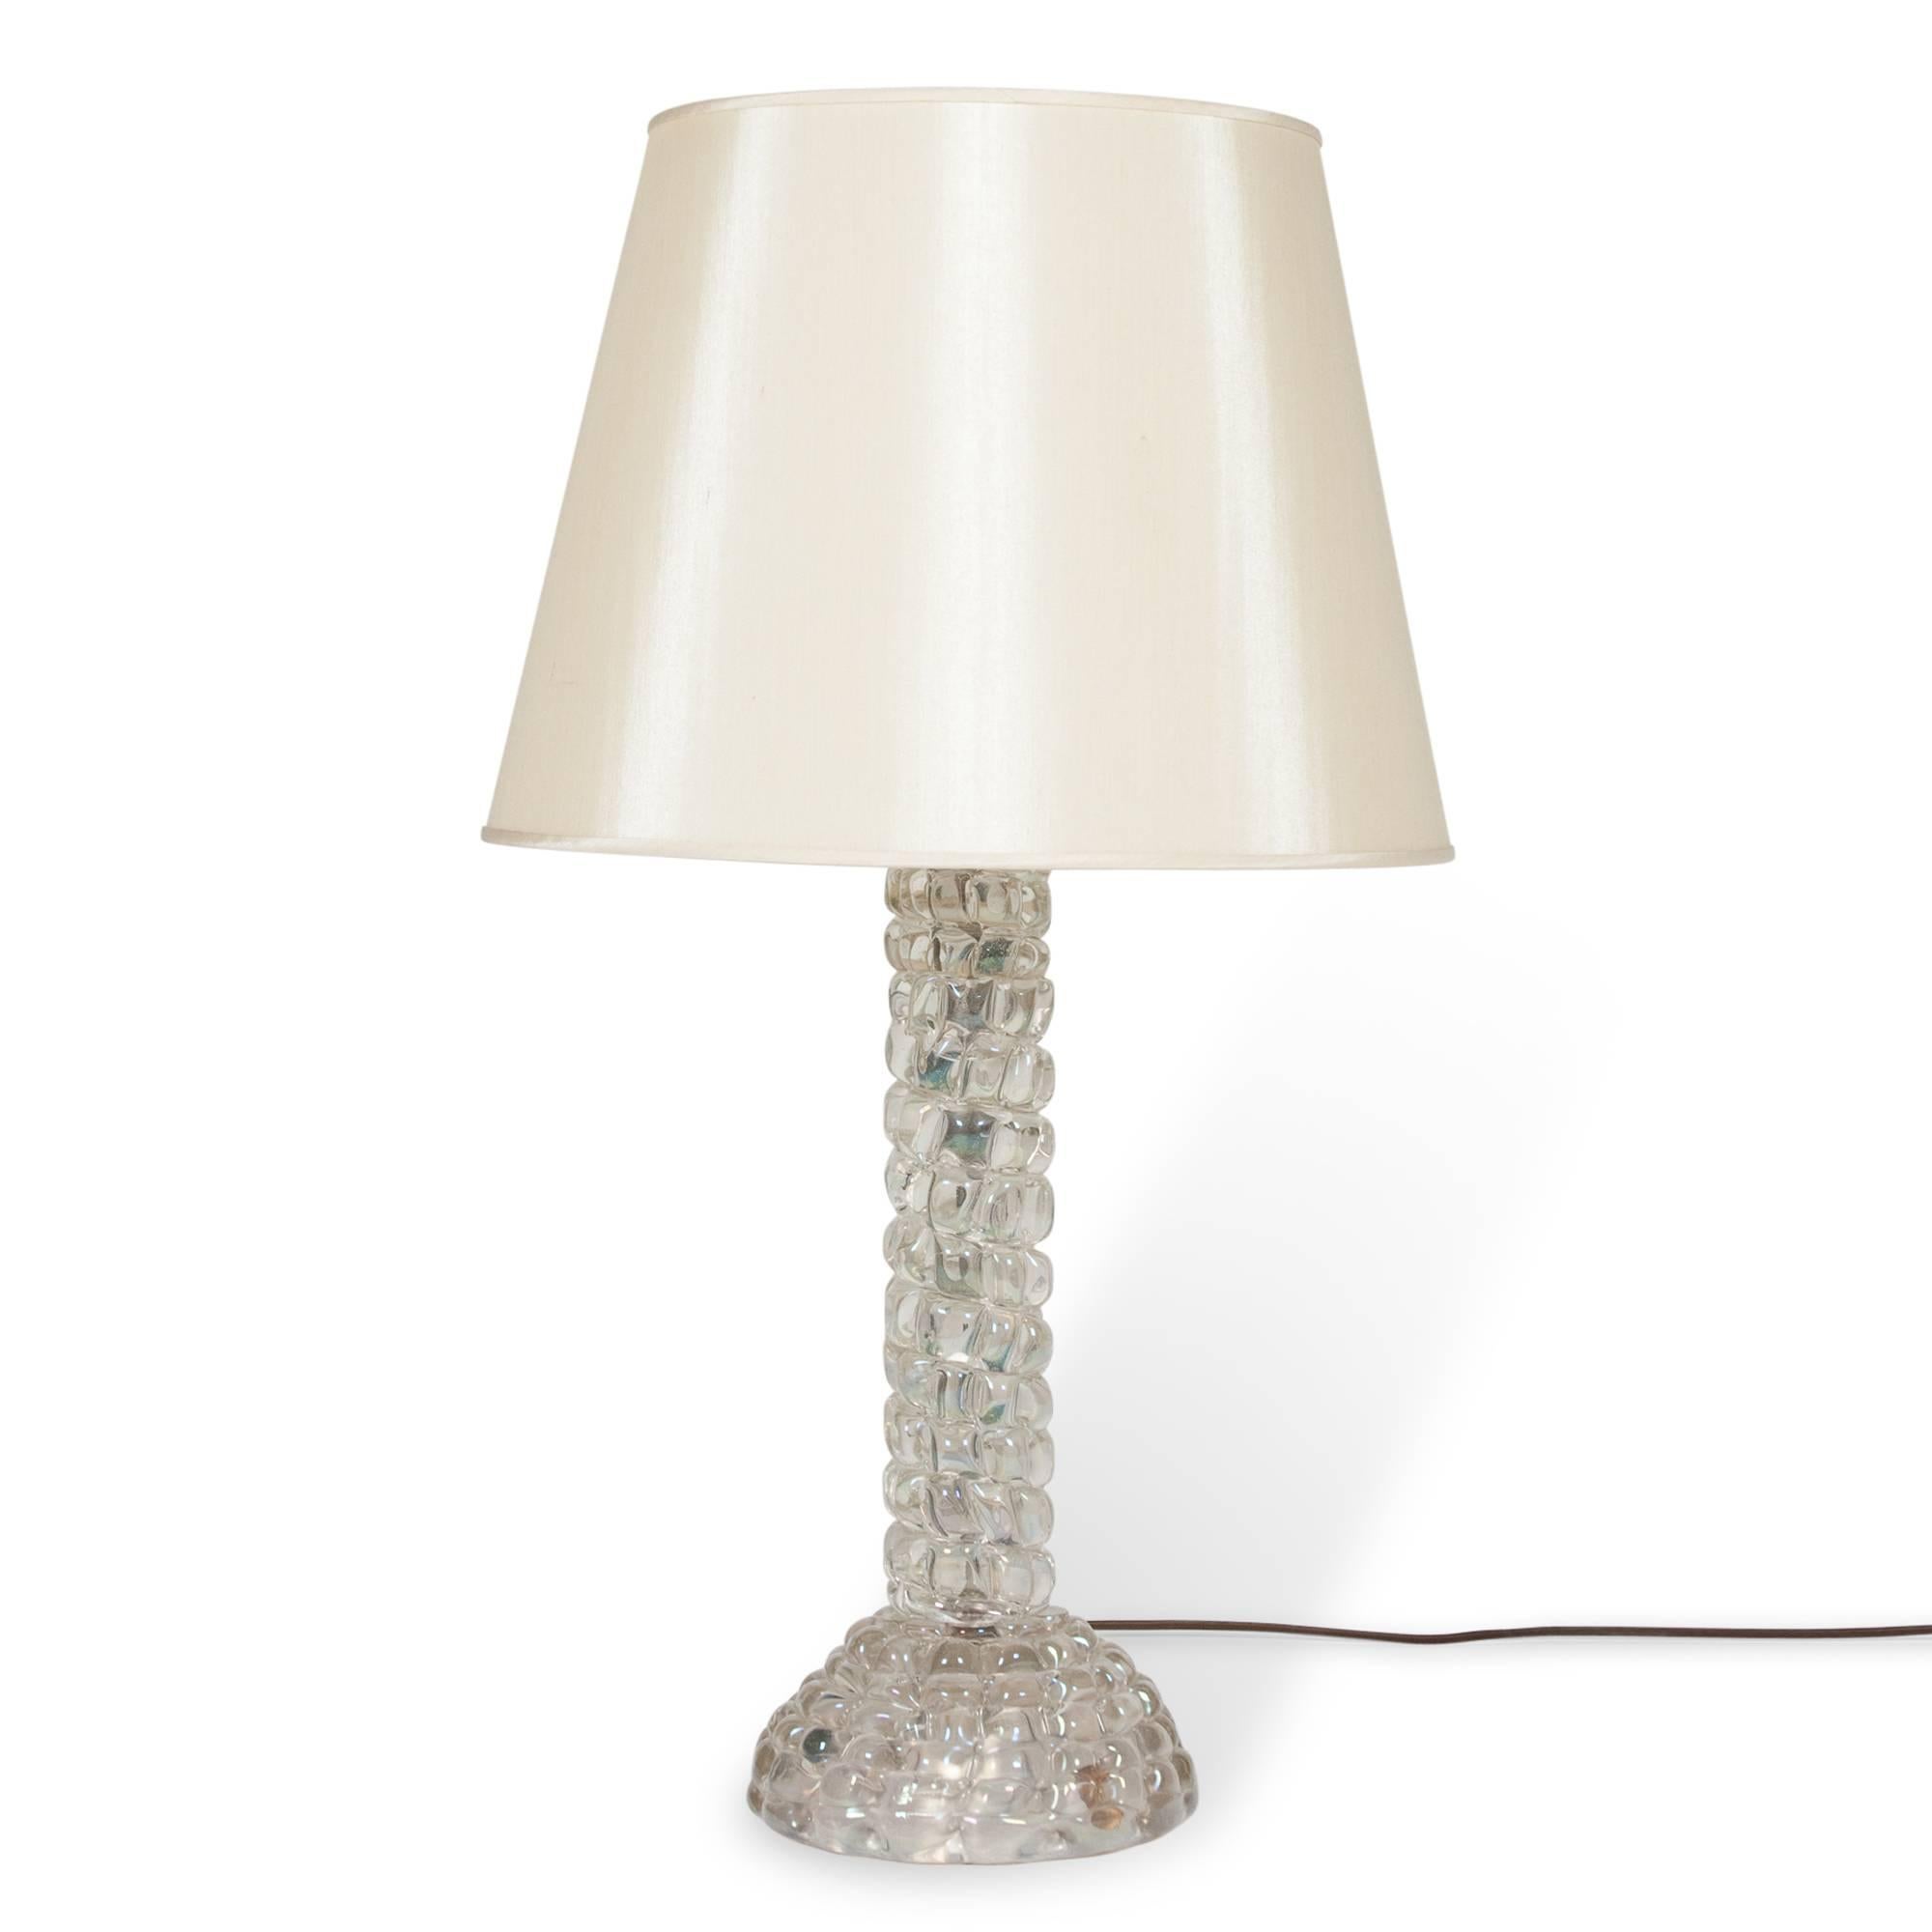 Barovier e Toso Glass Table Lamp, Italian, 1940s In Excellent Condition For Sale In Hoboken, NJ